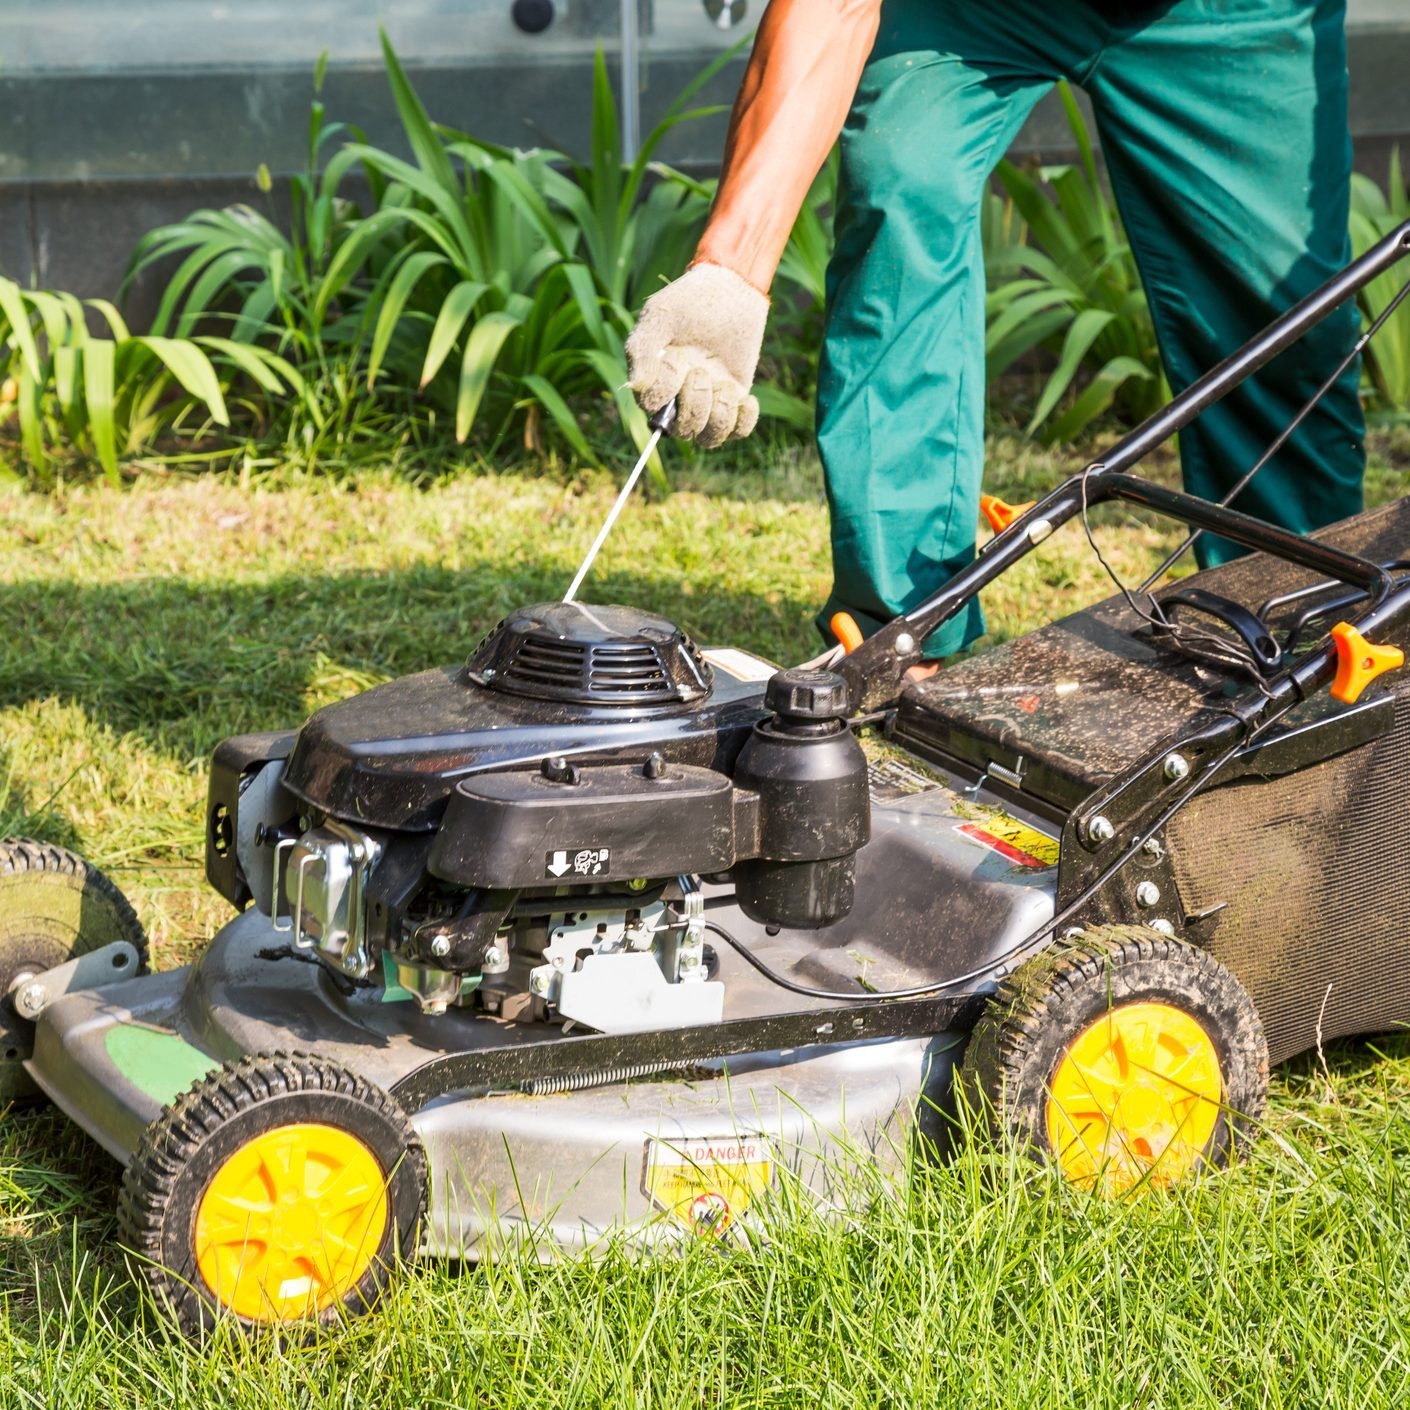 Here's What To Do If Your Lawn Mower Won't Start